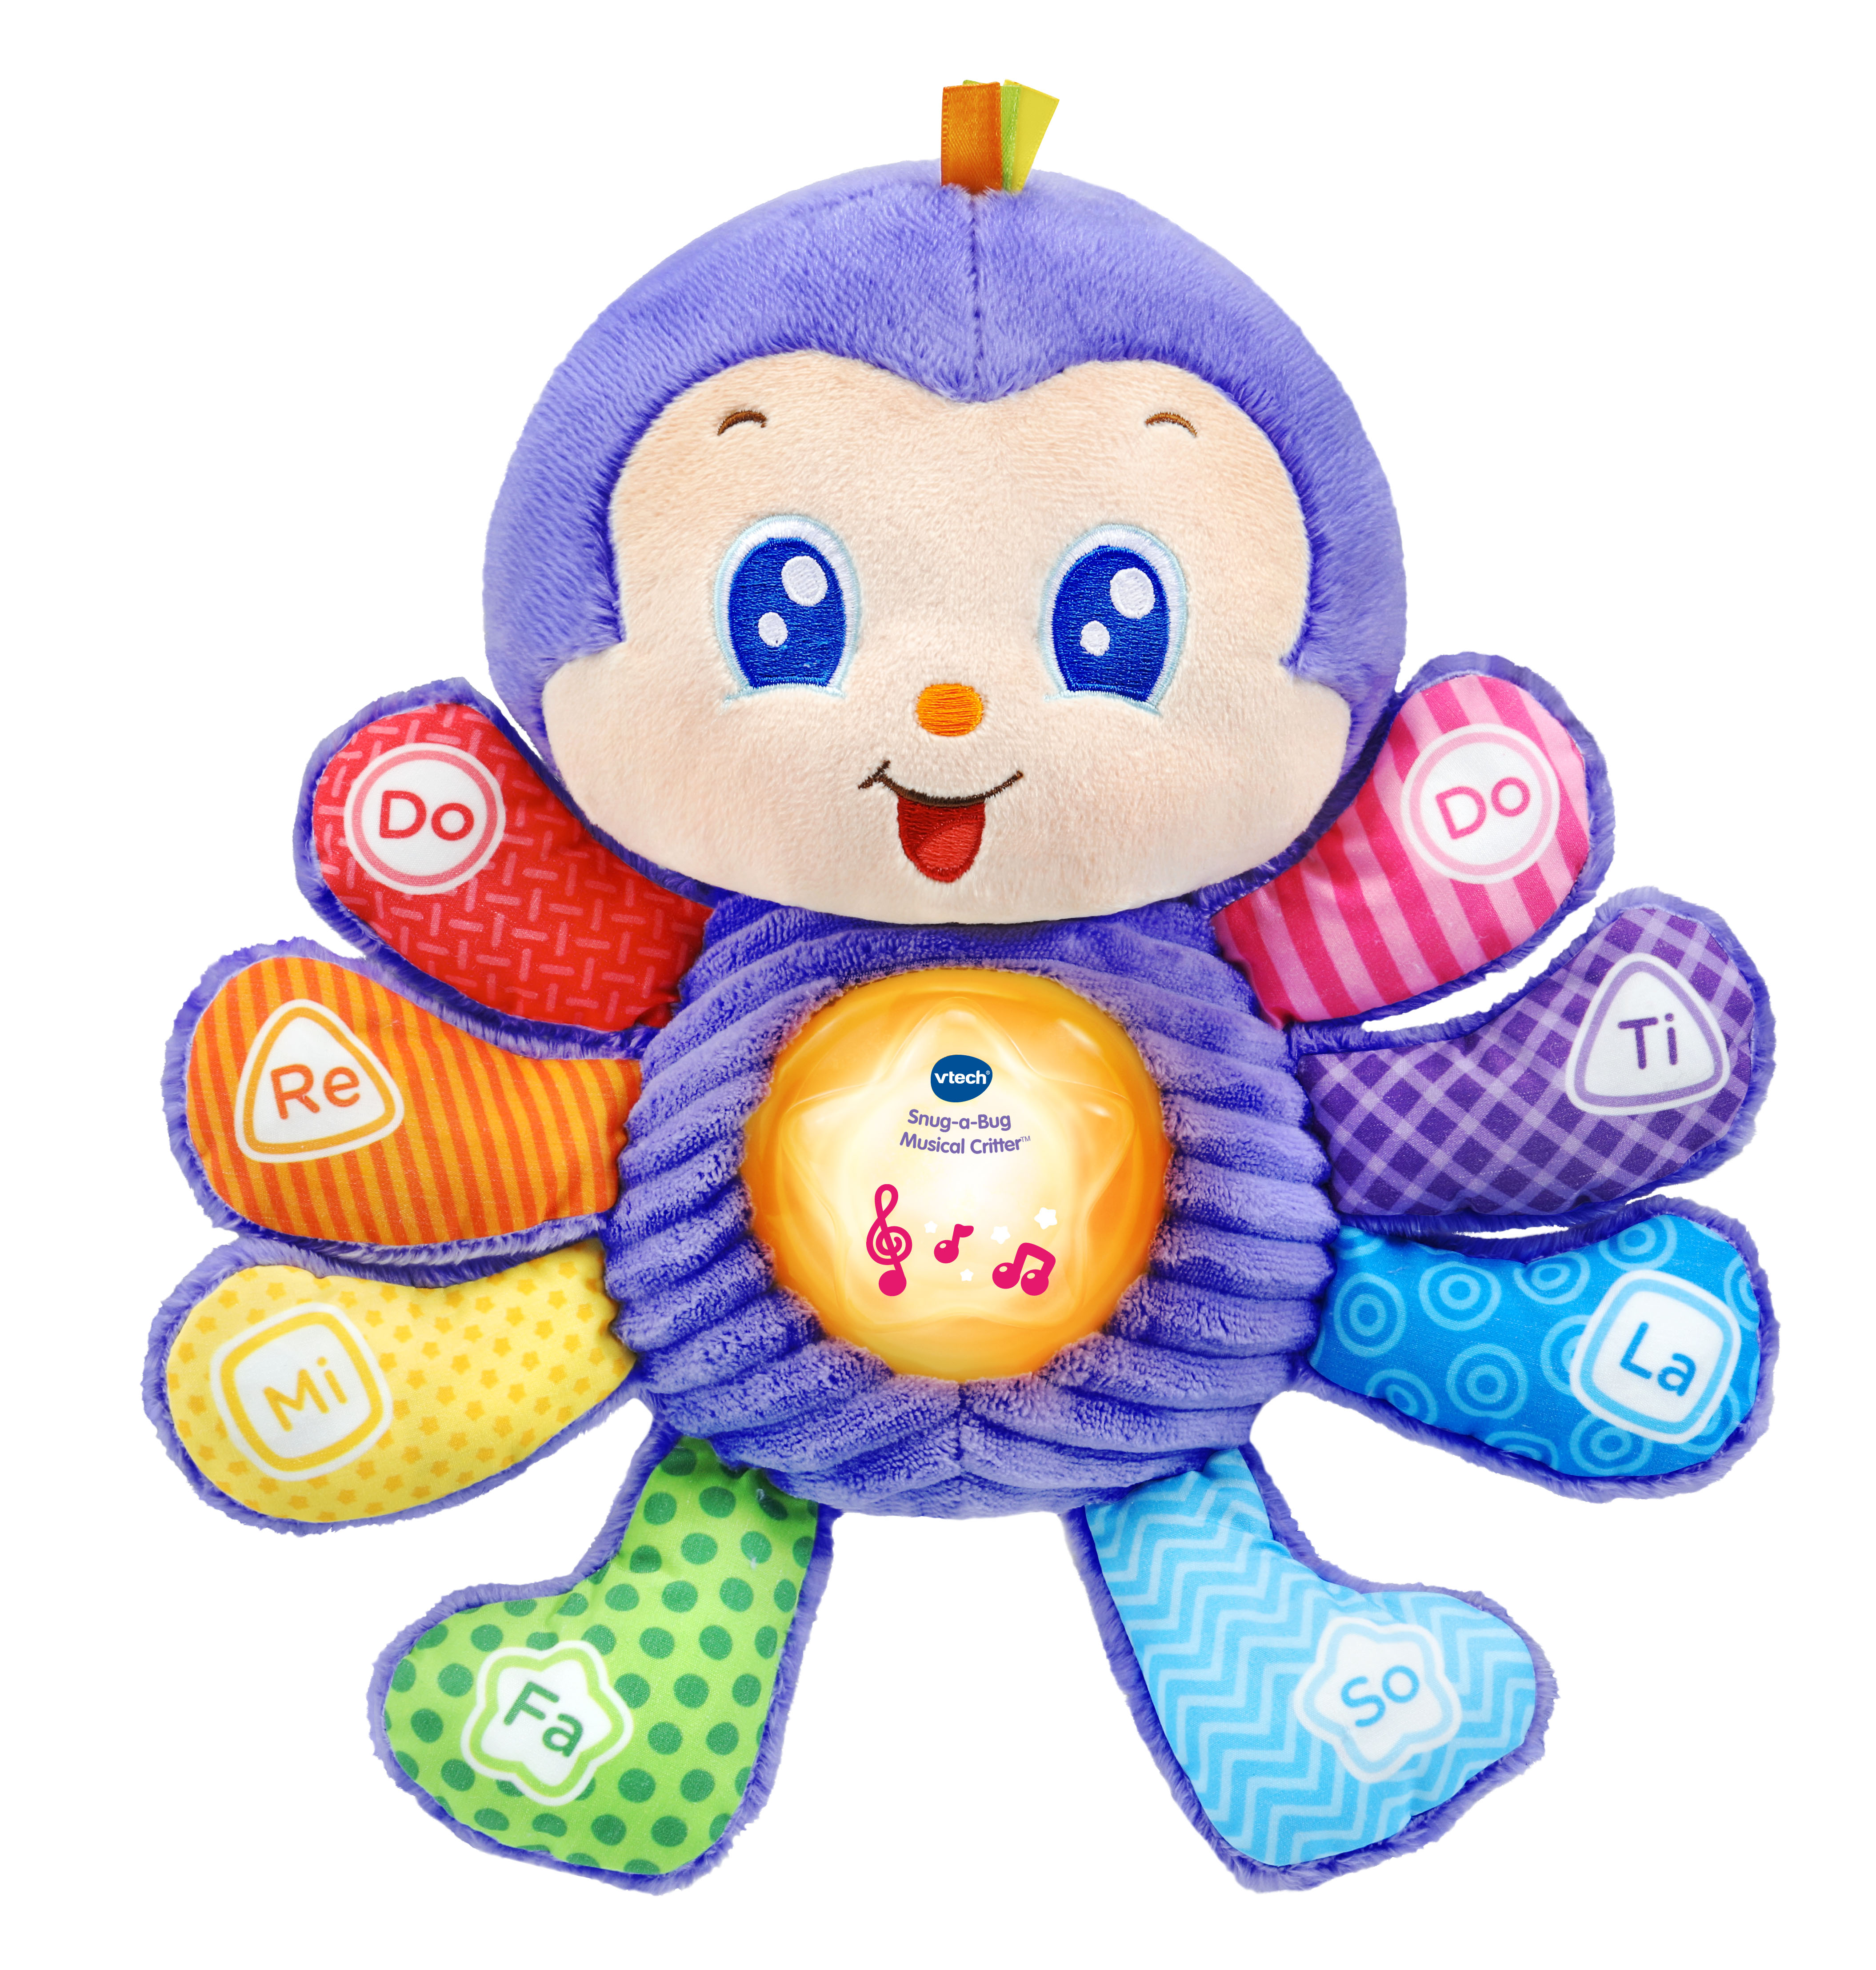 VTech Snug-a-Bug Musical Critter Infant Toy With Light-Up Tummy - image 1 of 9